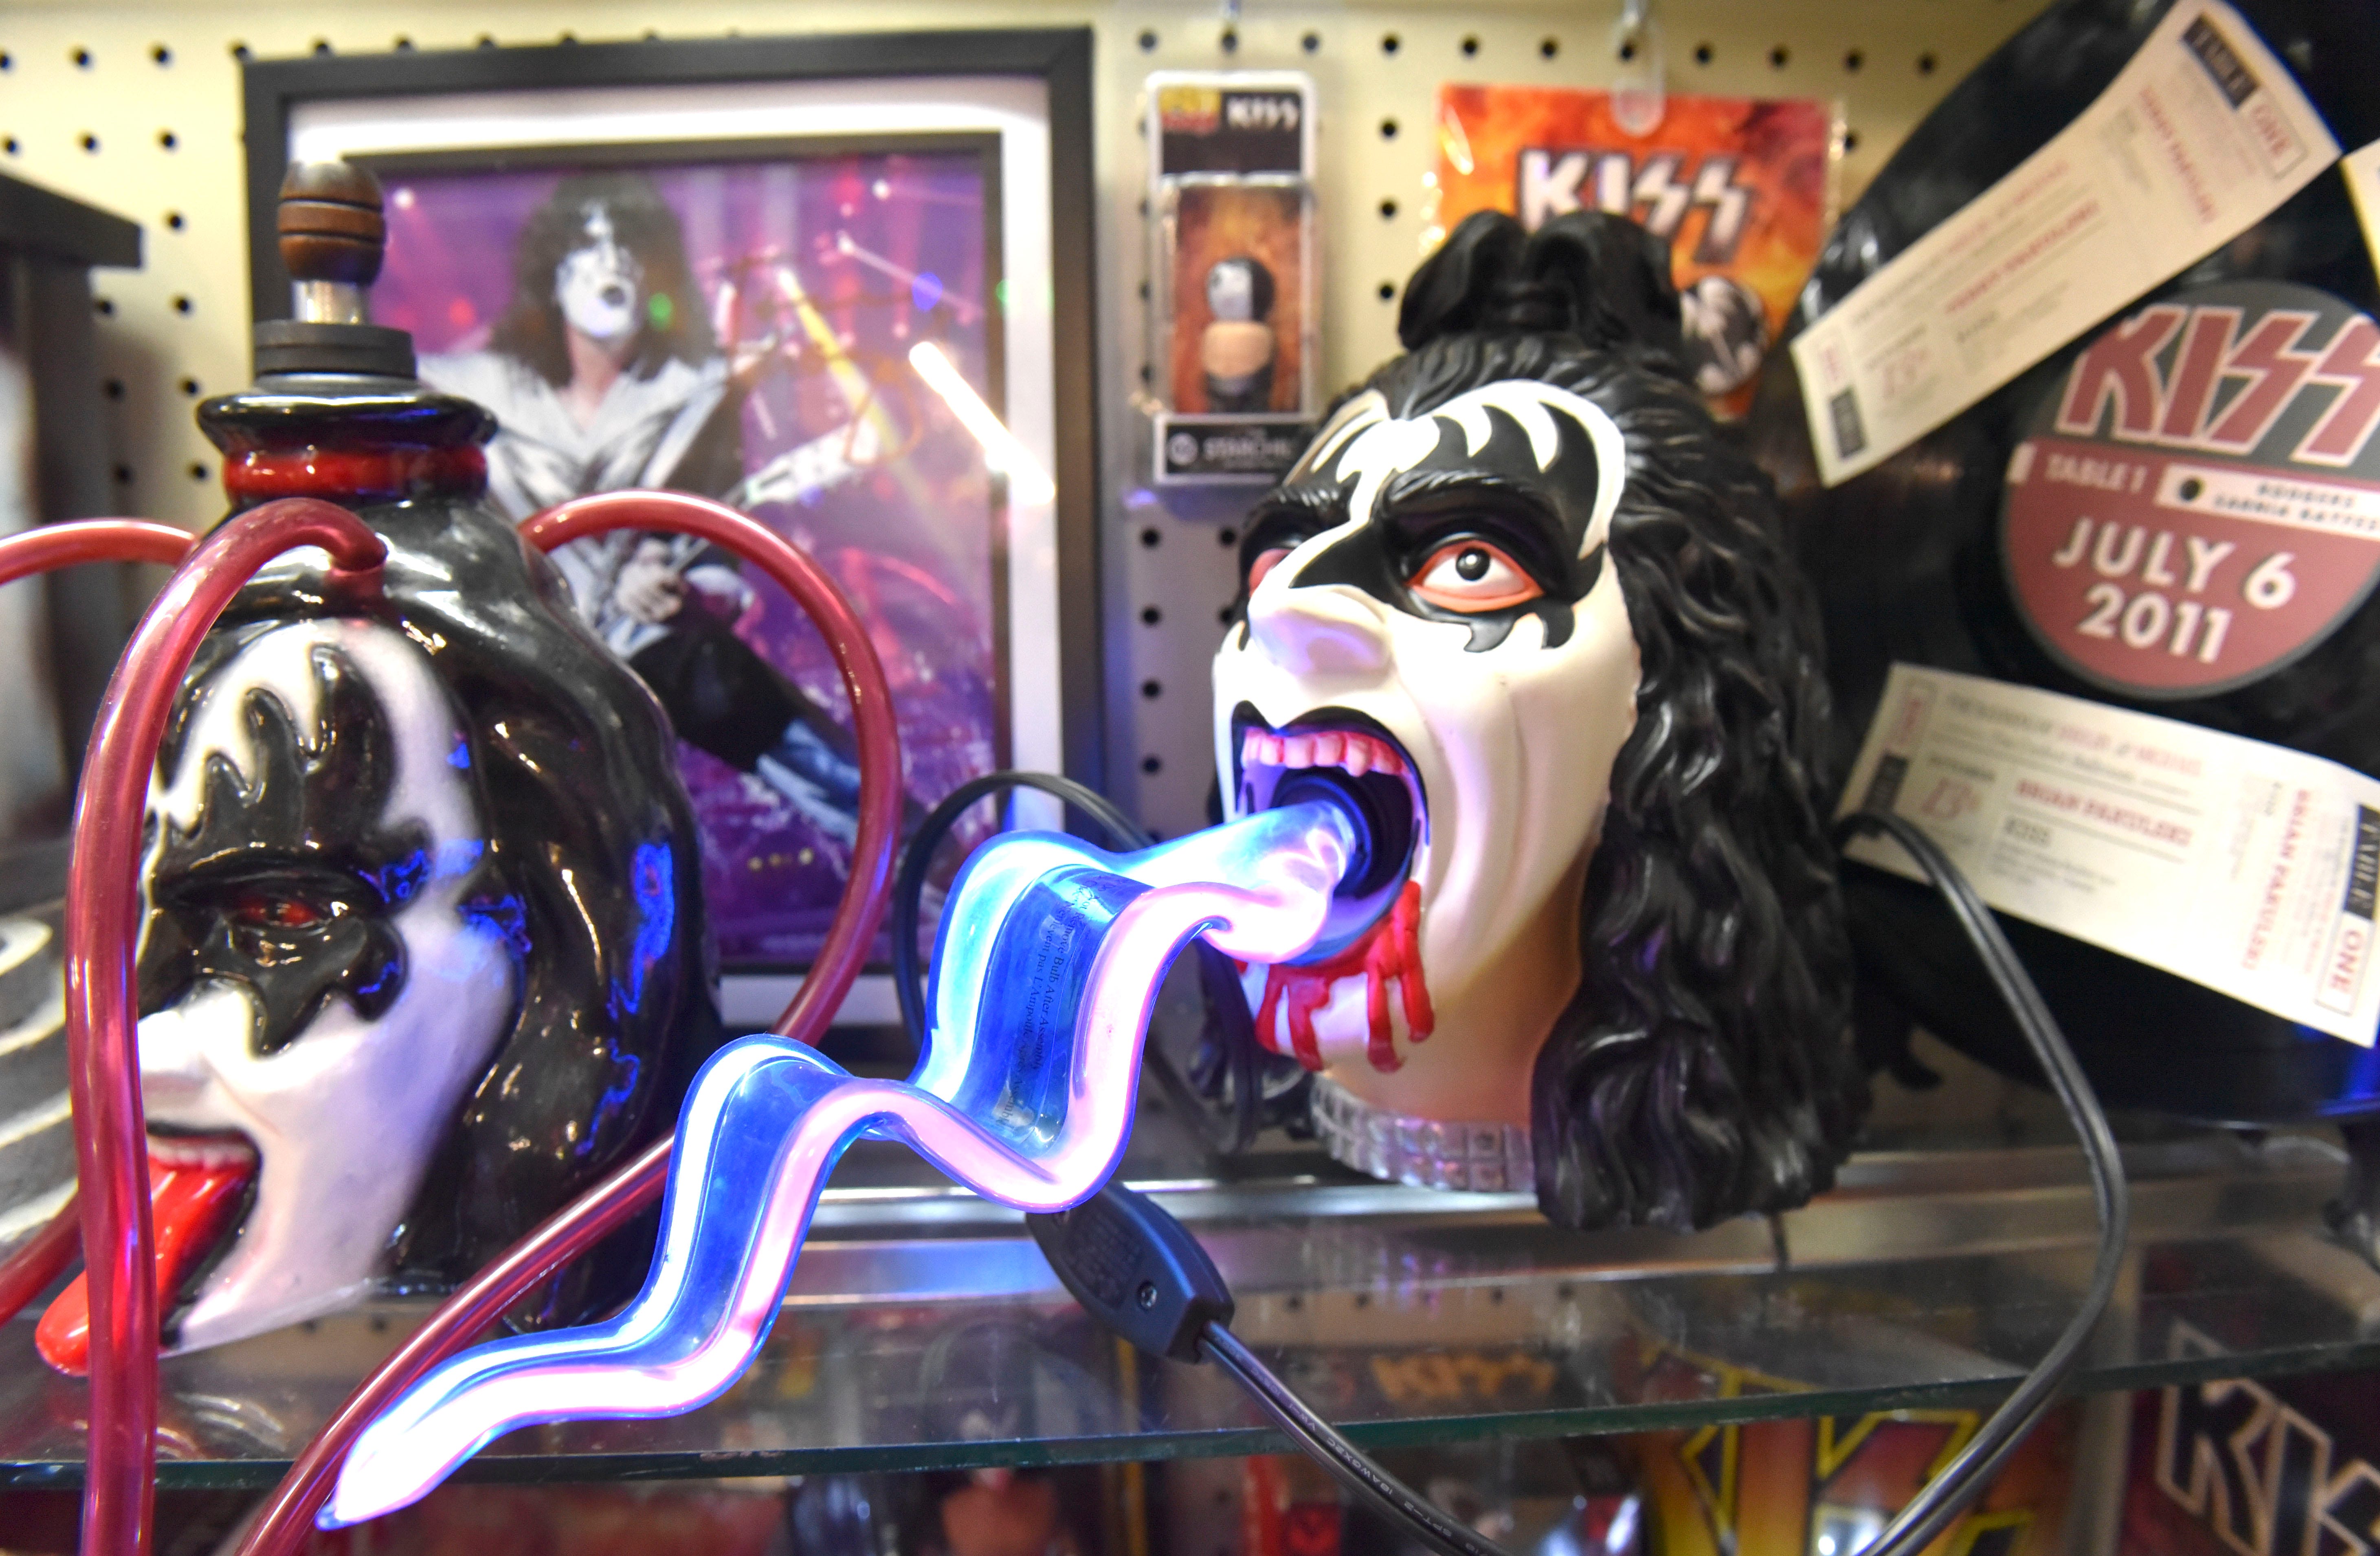 This is a Gene Simmons tongue lamp.